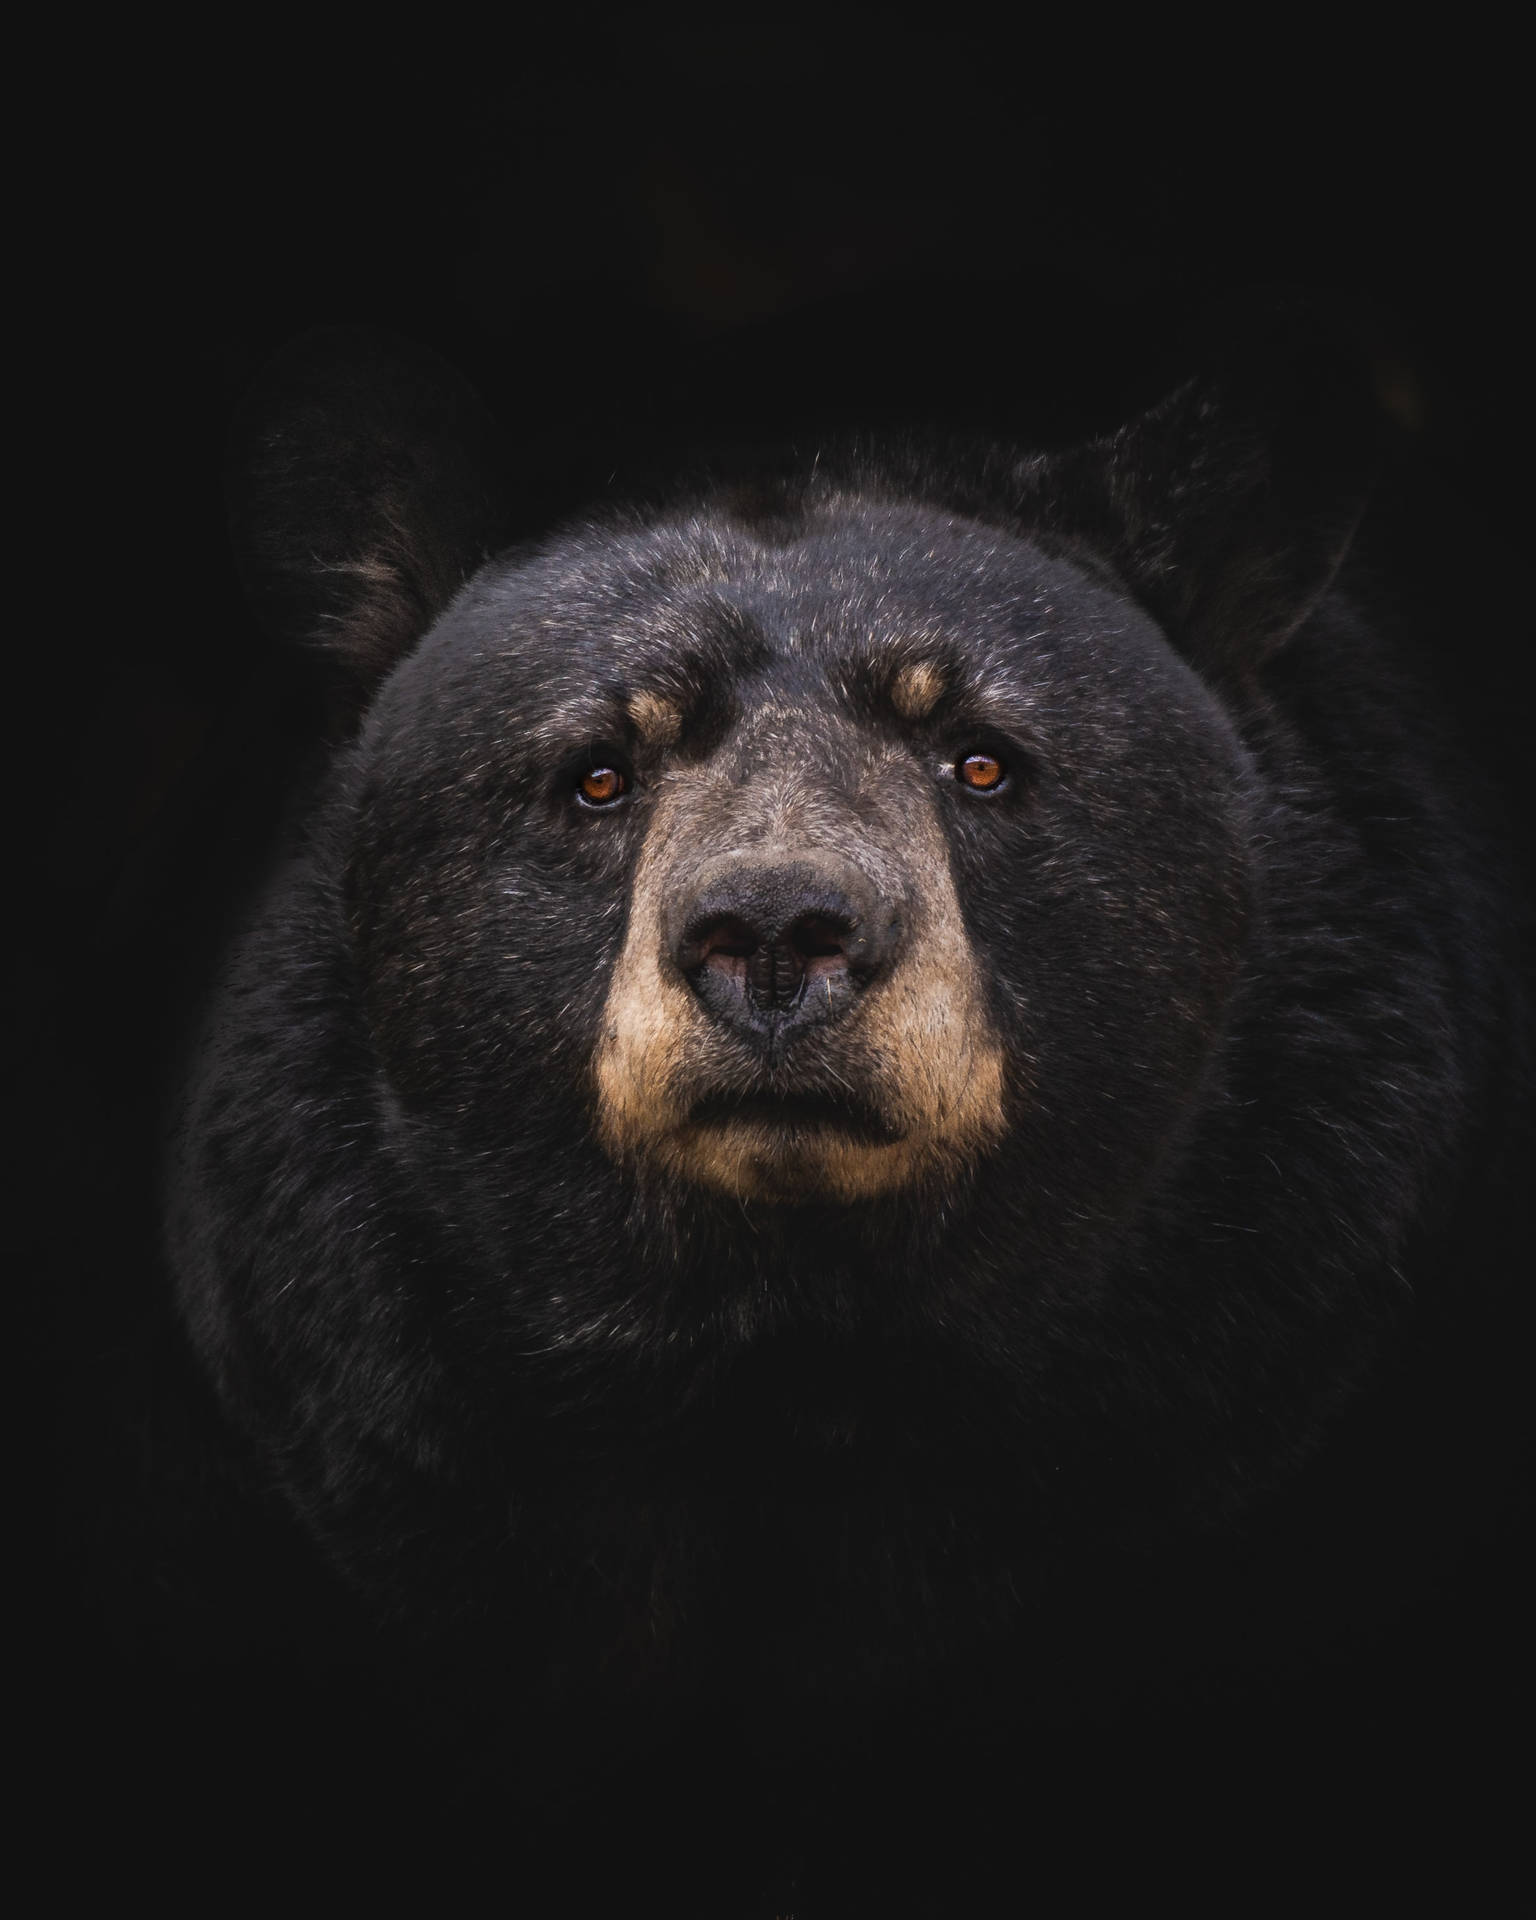 Black Bear Cell Phone Image Background